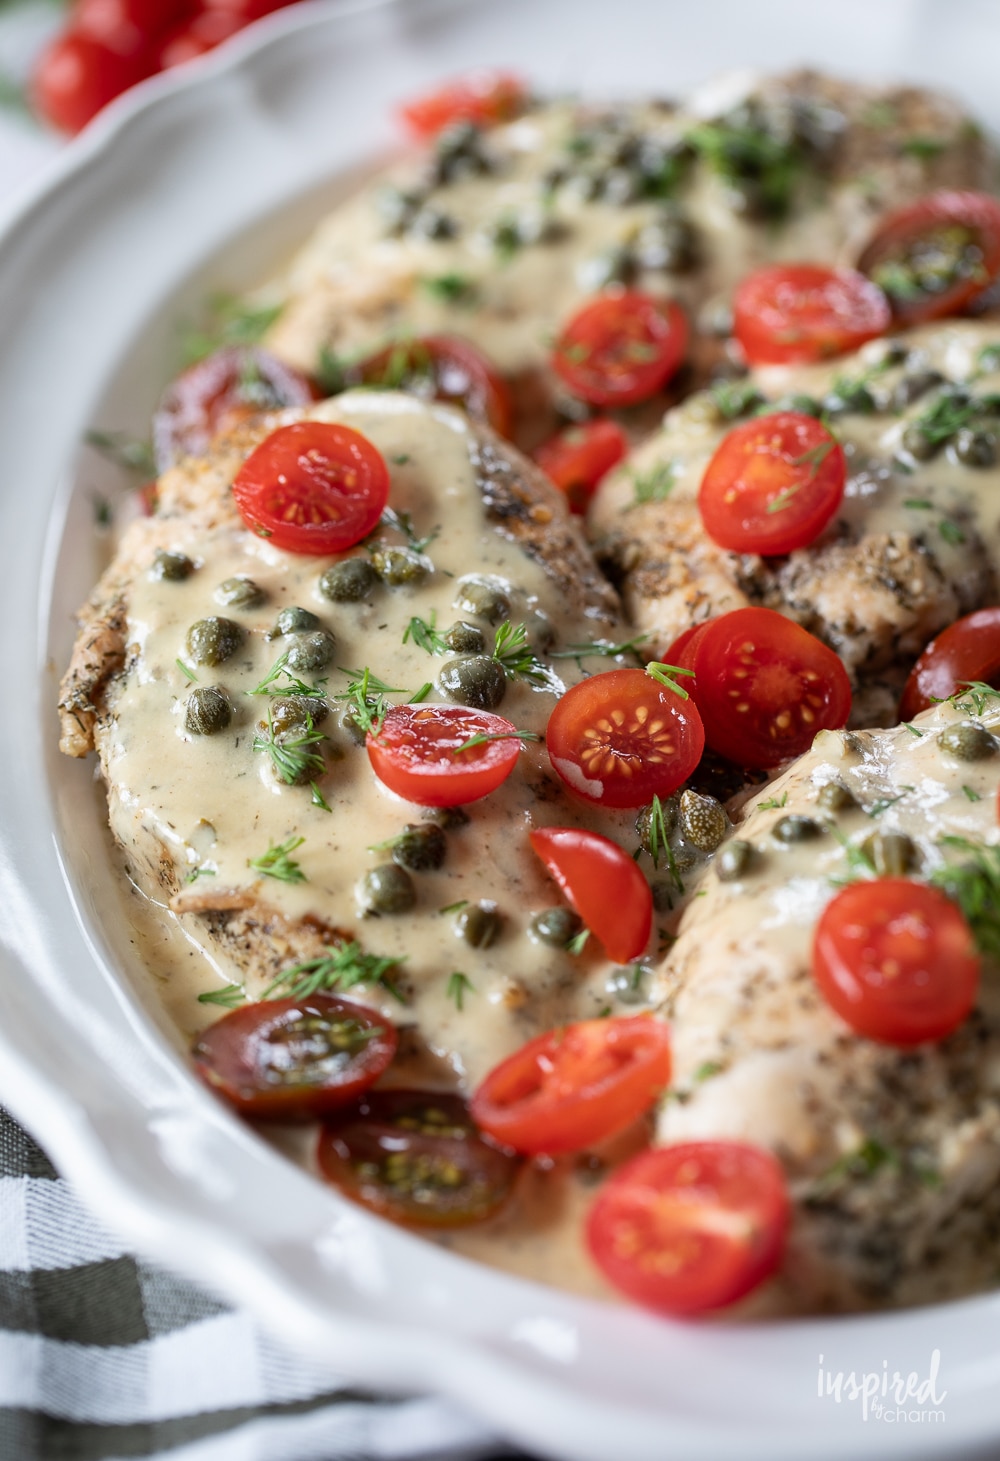 chicken served in a caper cream sauce with tomatoes.